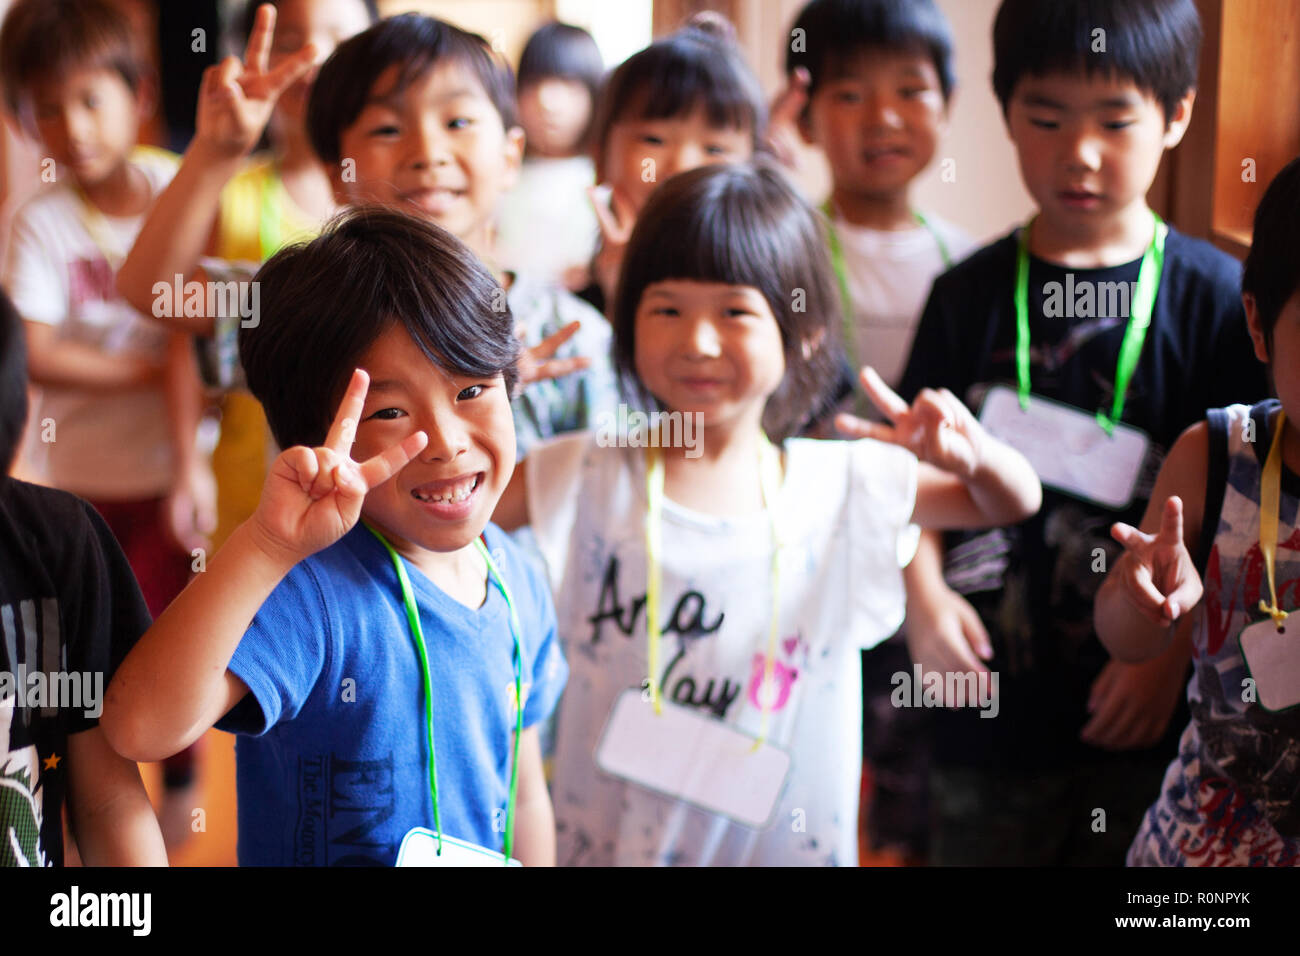 Group of smiling children in a Japanese preschool, making peace sign, looking at camera. Stock Photo